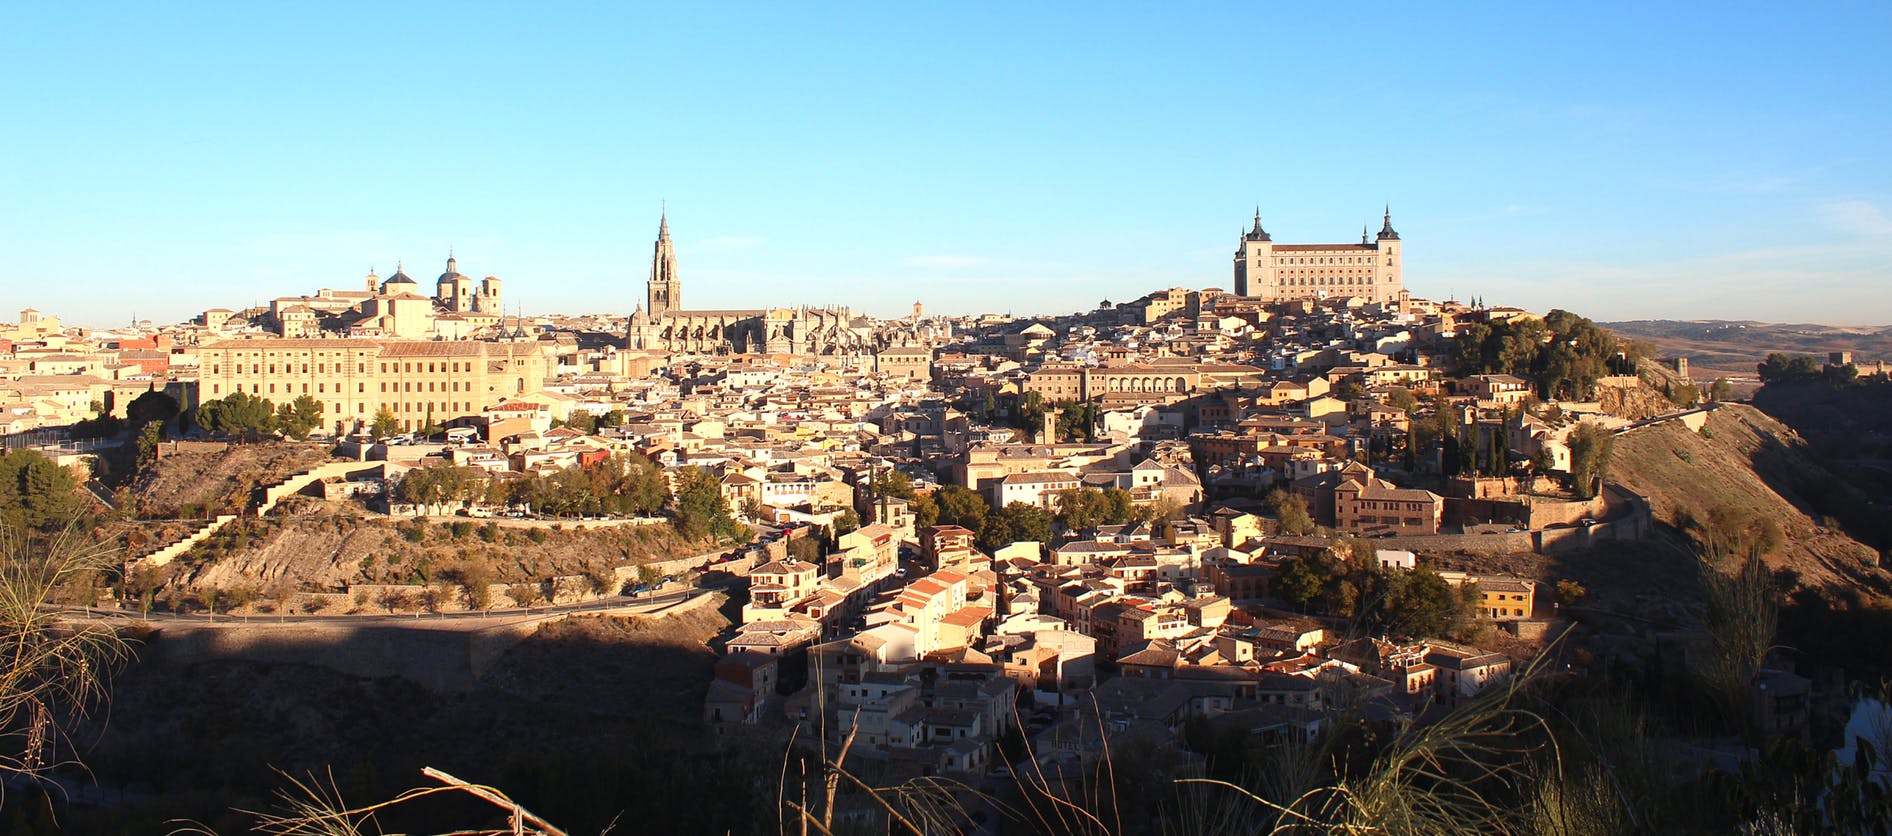 Toledo guided tour from Madrid with visit of a local winery wine tasting